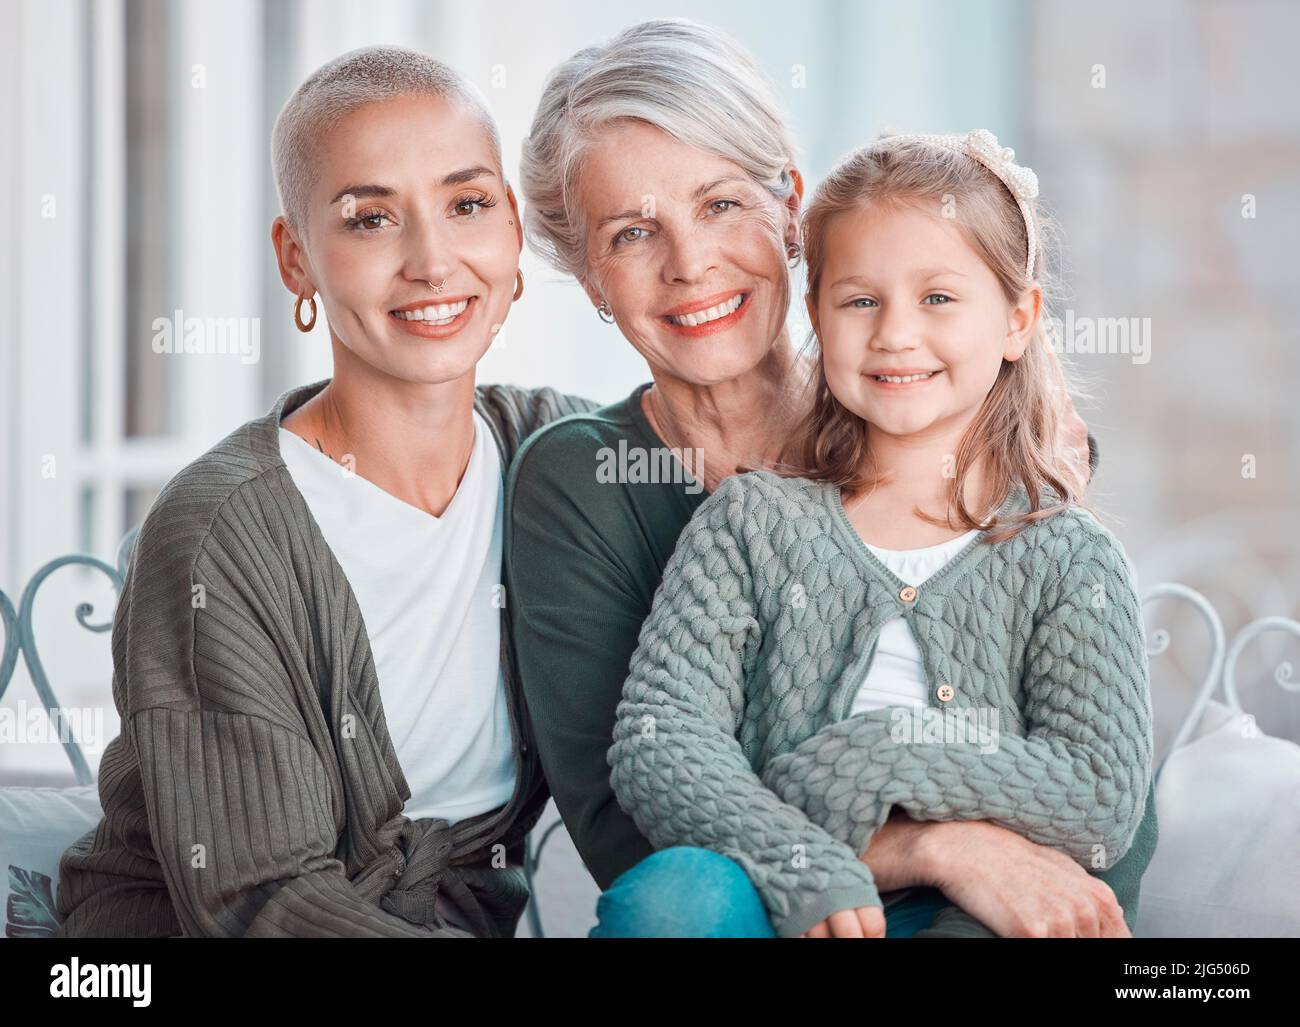 Portrait of three generations of females looking and smiling at the camera. Adorable little girl bonding with her mother and grandmother at home Stock Photo